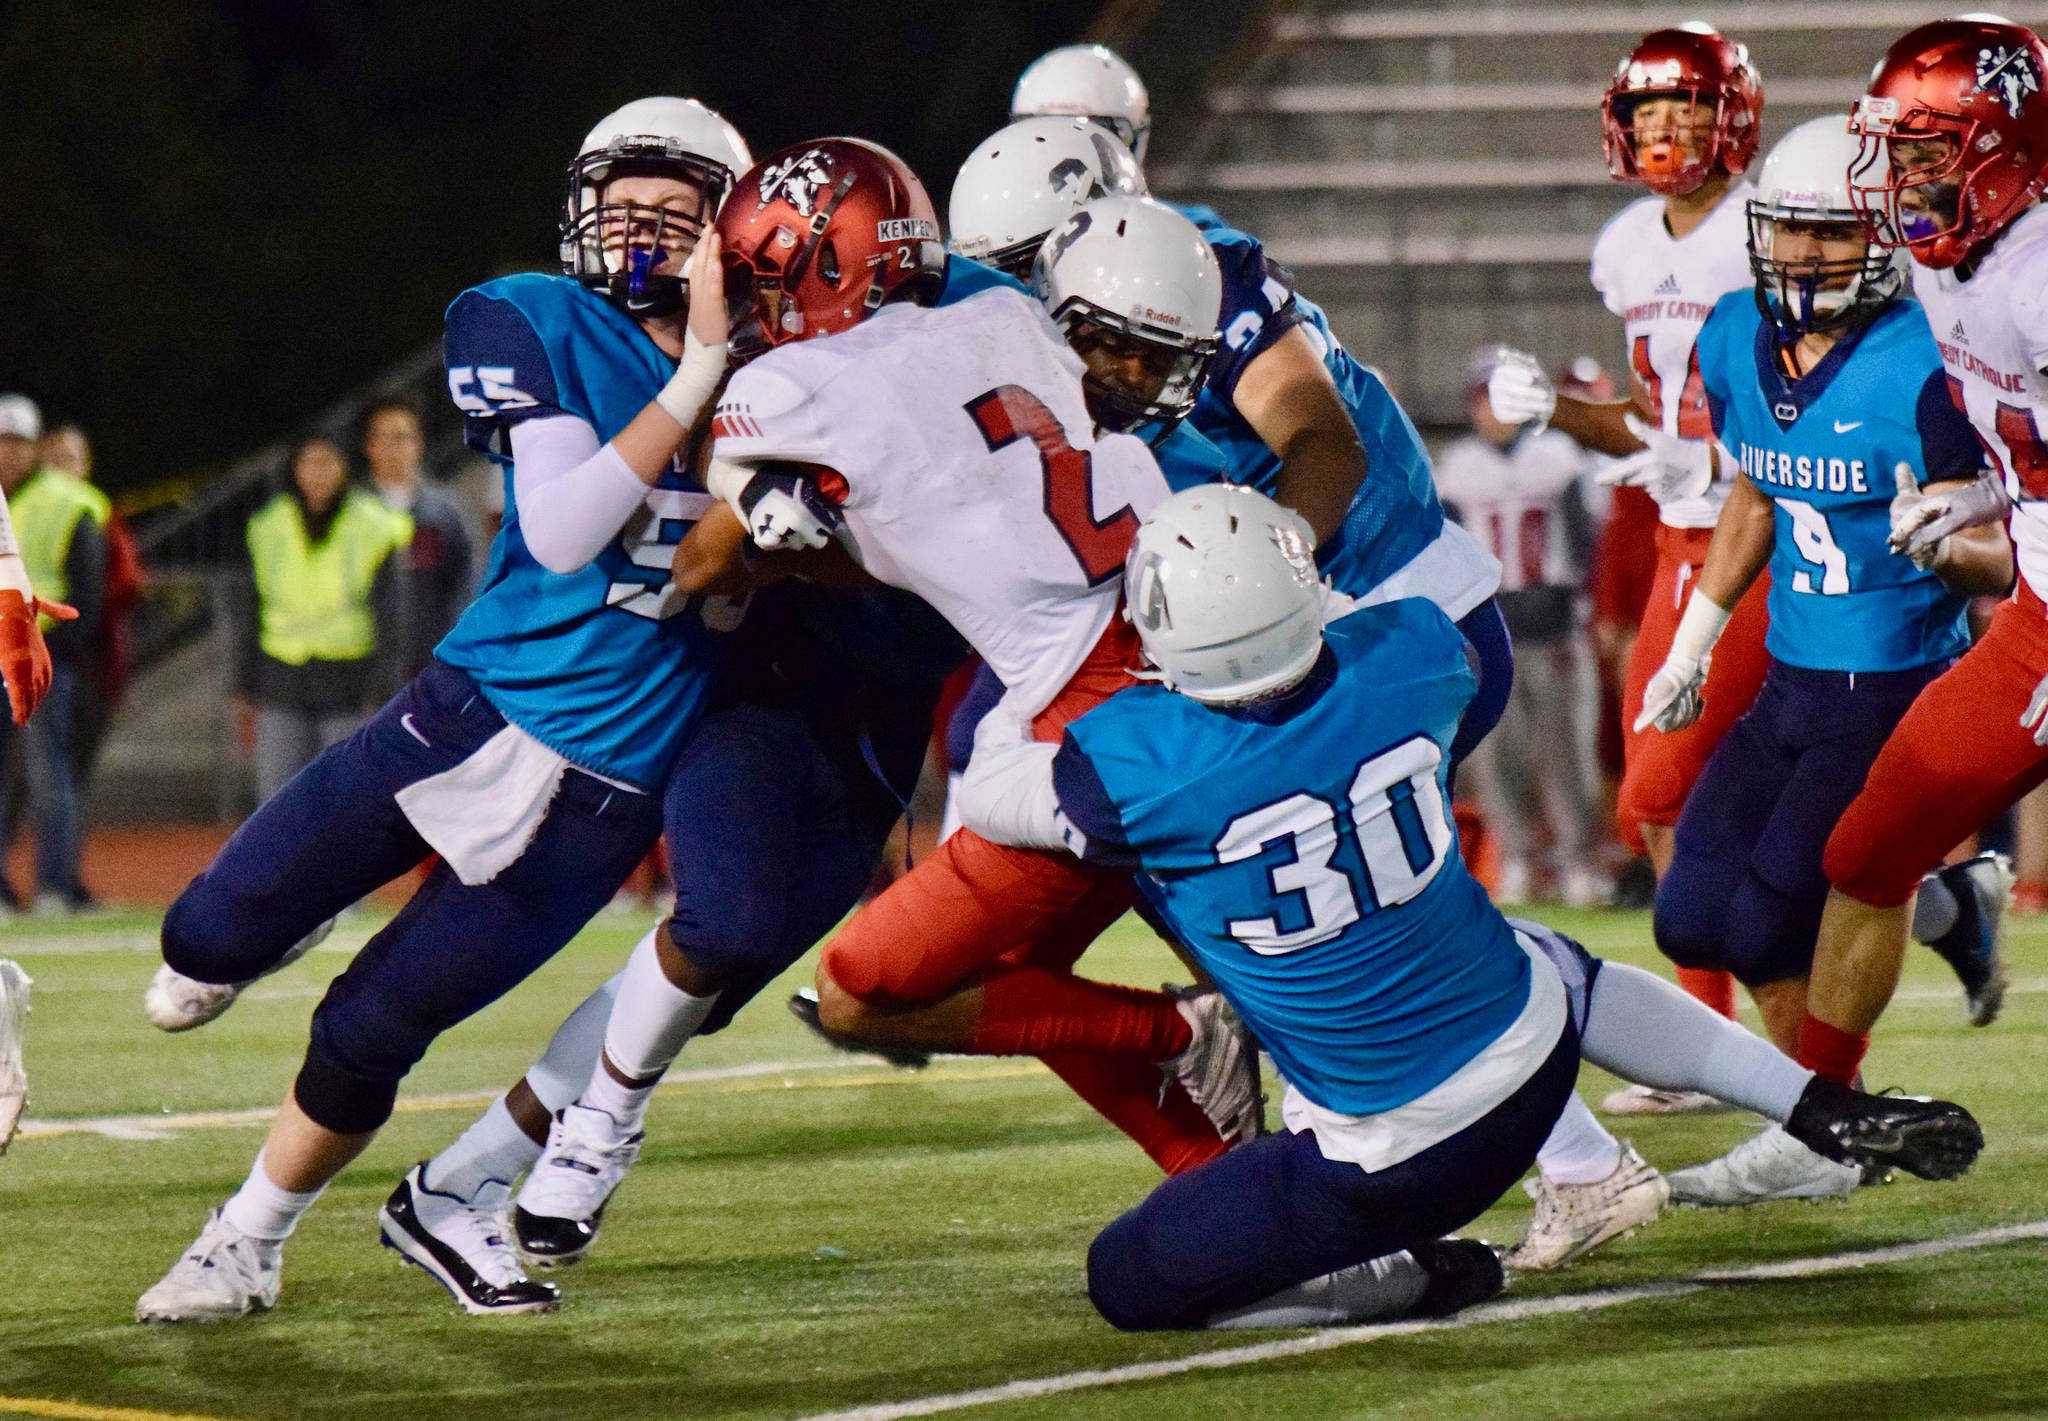 Auburn Riverside defenders bring down Kennedy Catholic’s Junior Alexander during North Puget Sound League Mountain Division action in Oct. 2018 at Auburn Memorial Stadium. Photo by Rachel Ciampi/Auburn Reporter